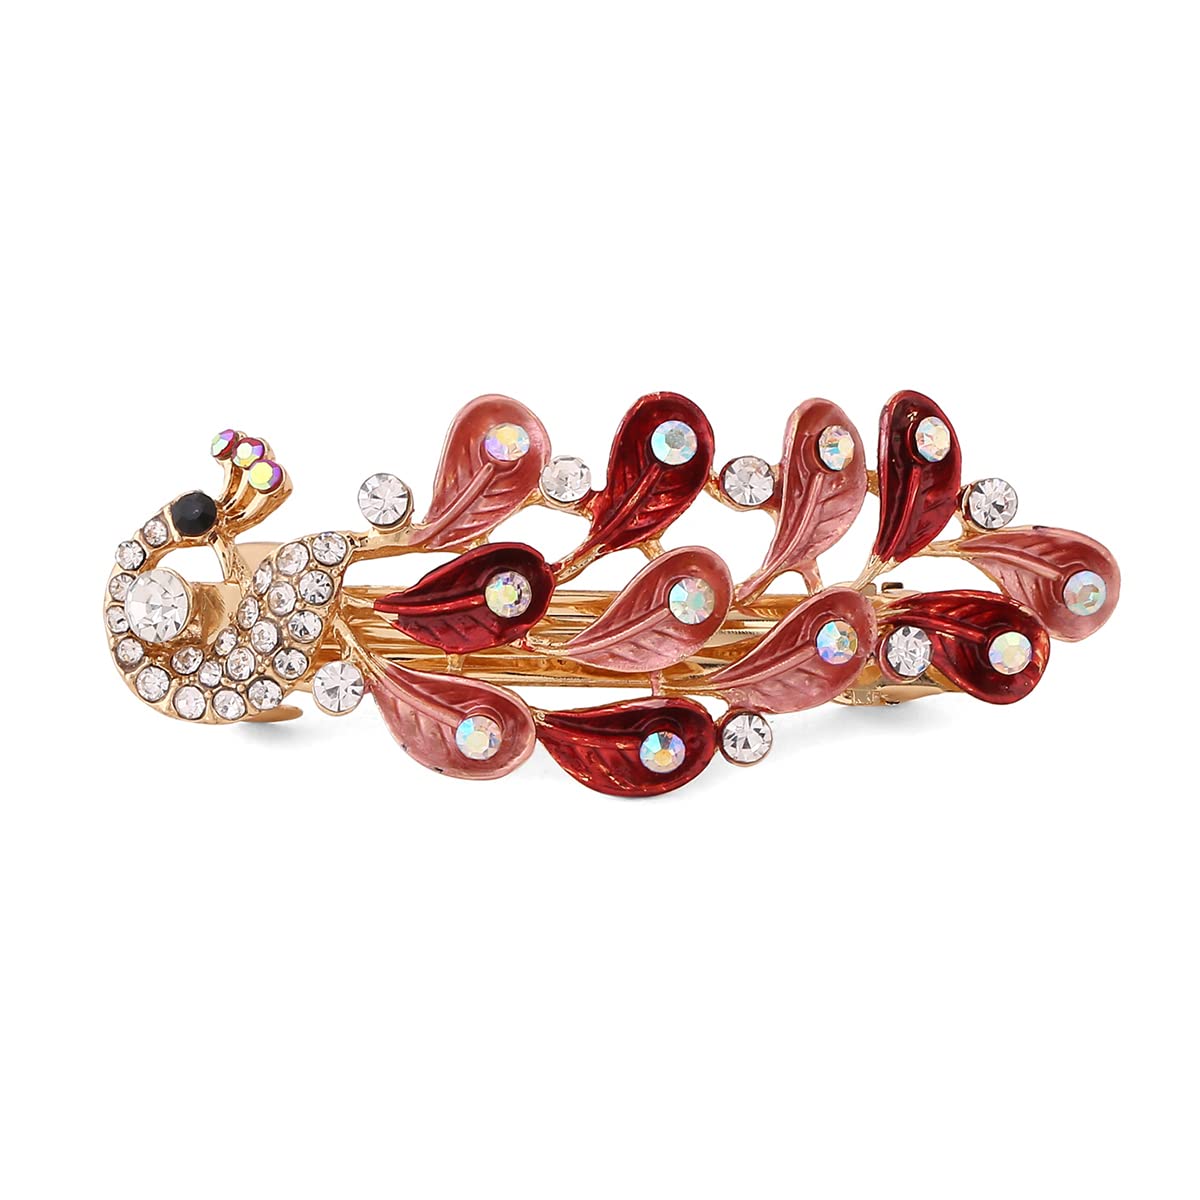 Yellow Chimes Hair Clips for Women Girls Barrette Hair Clips for Women Hair Accessories for Women Peacock Clips for Women Red Crystal French Barrette Hair Clips for Women and Girls Gift For Women & Girls